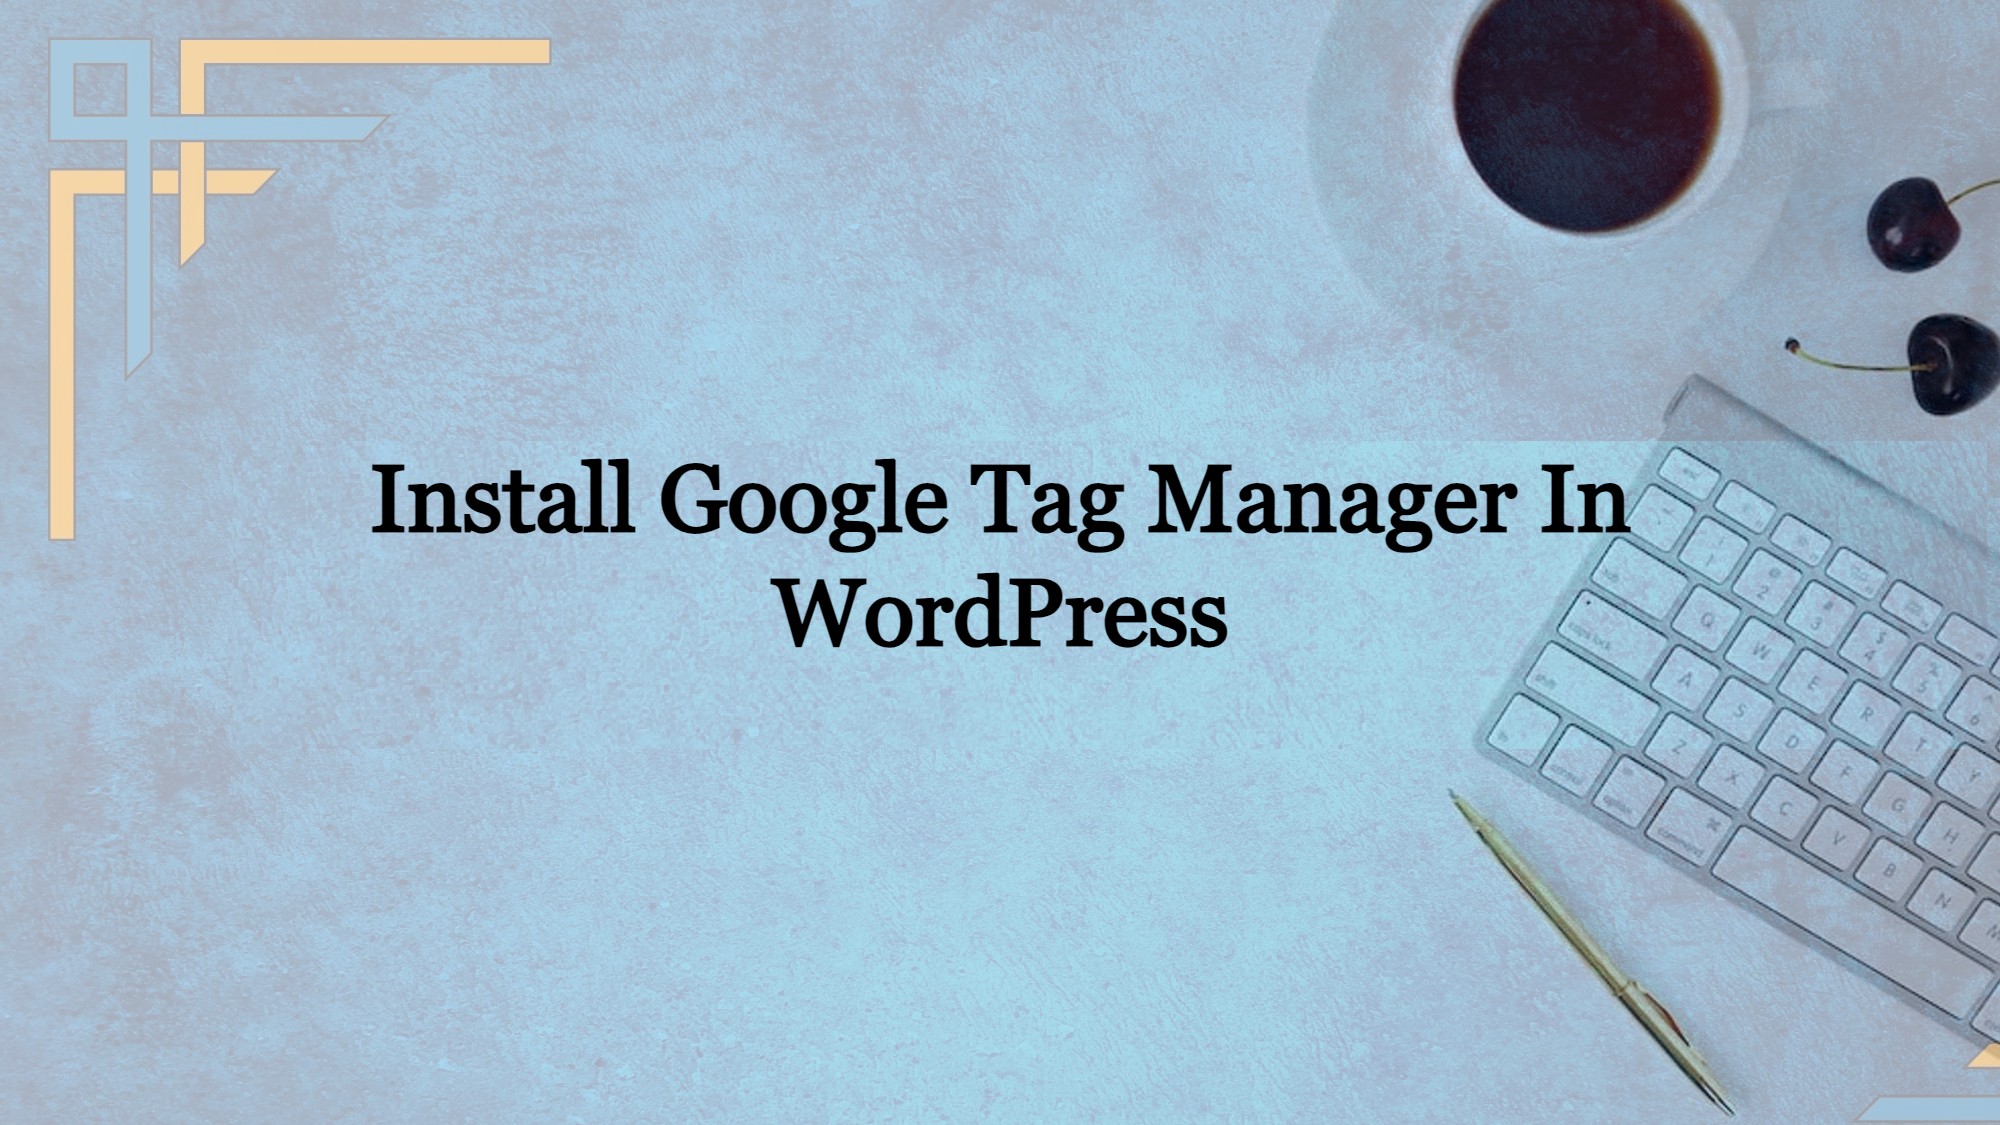 Install Google Tag Manager In WordPress